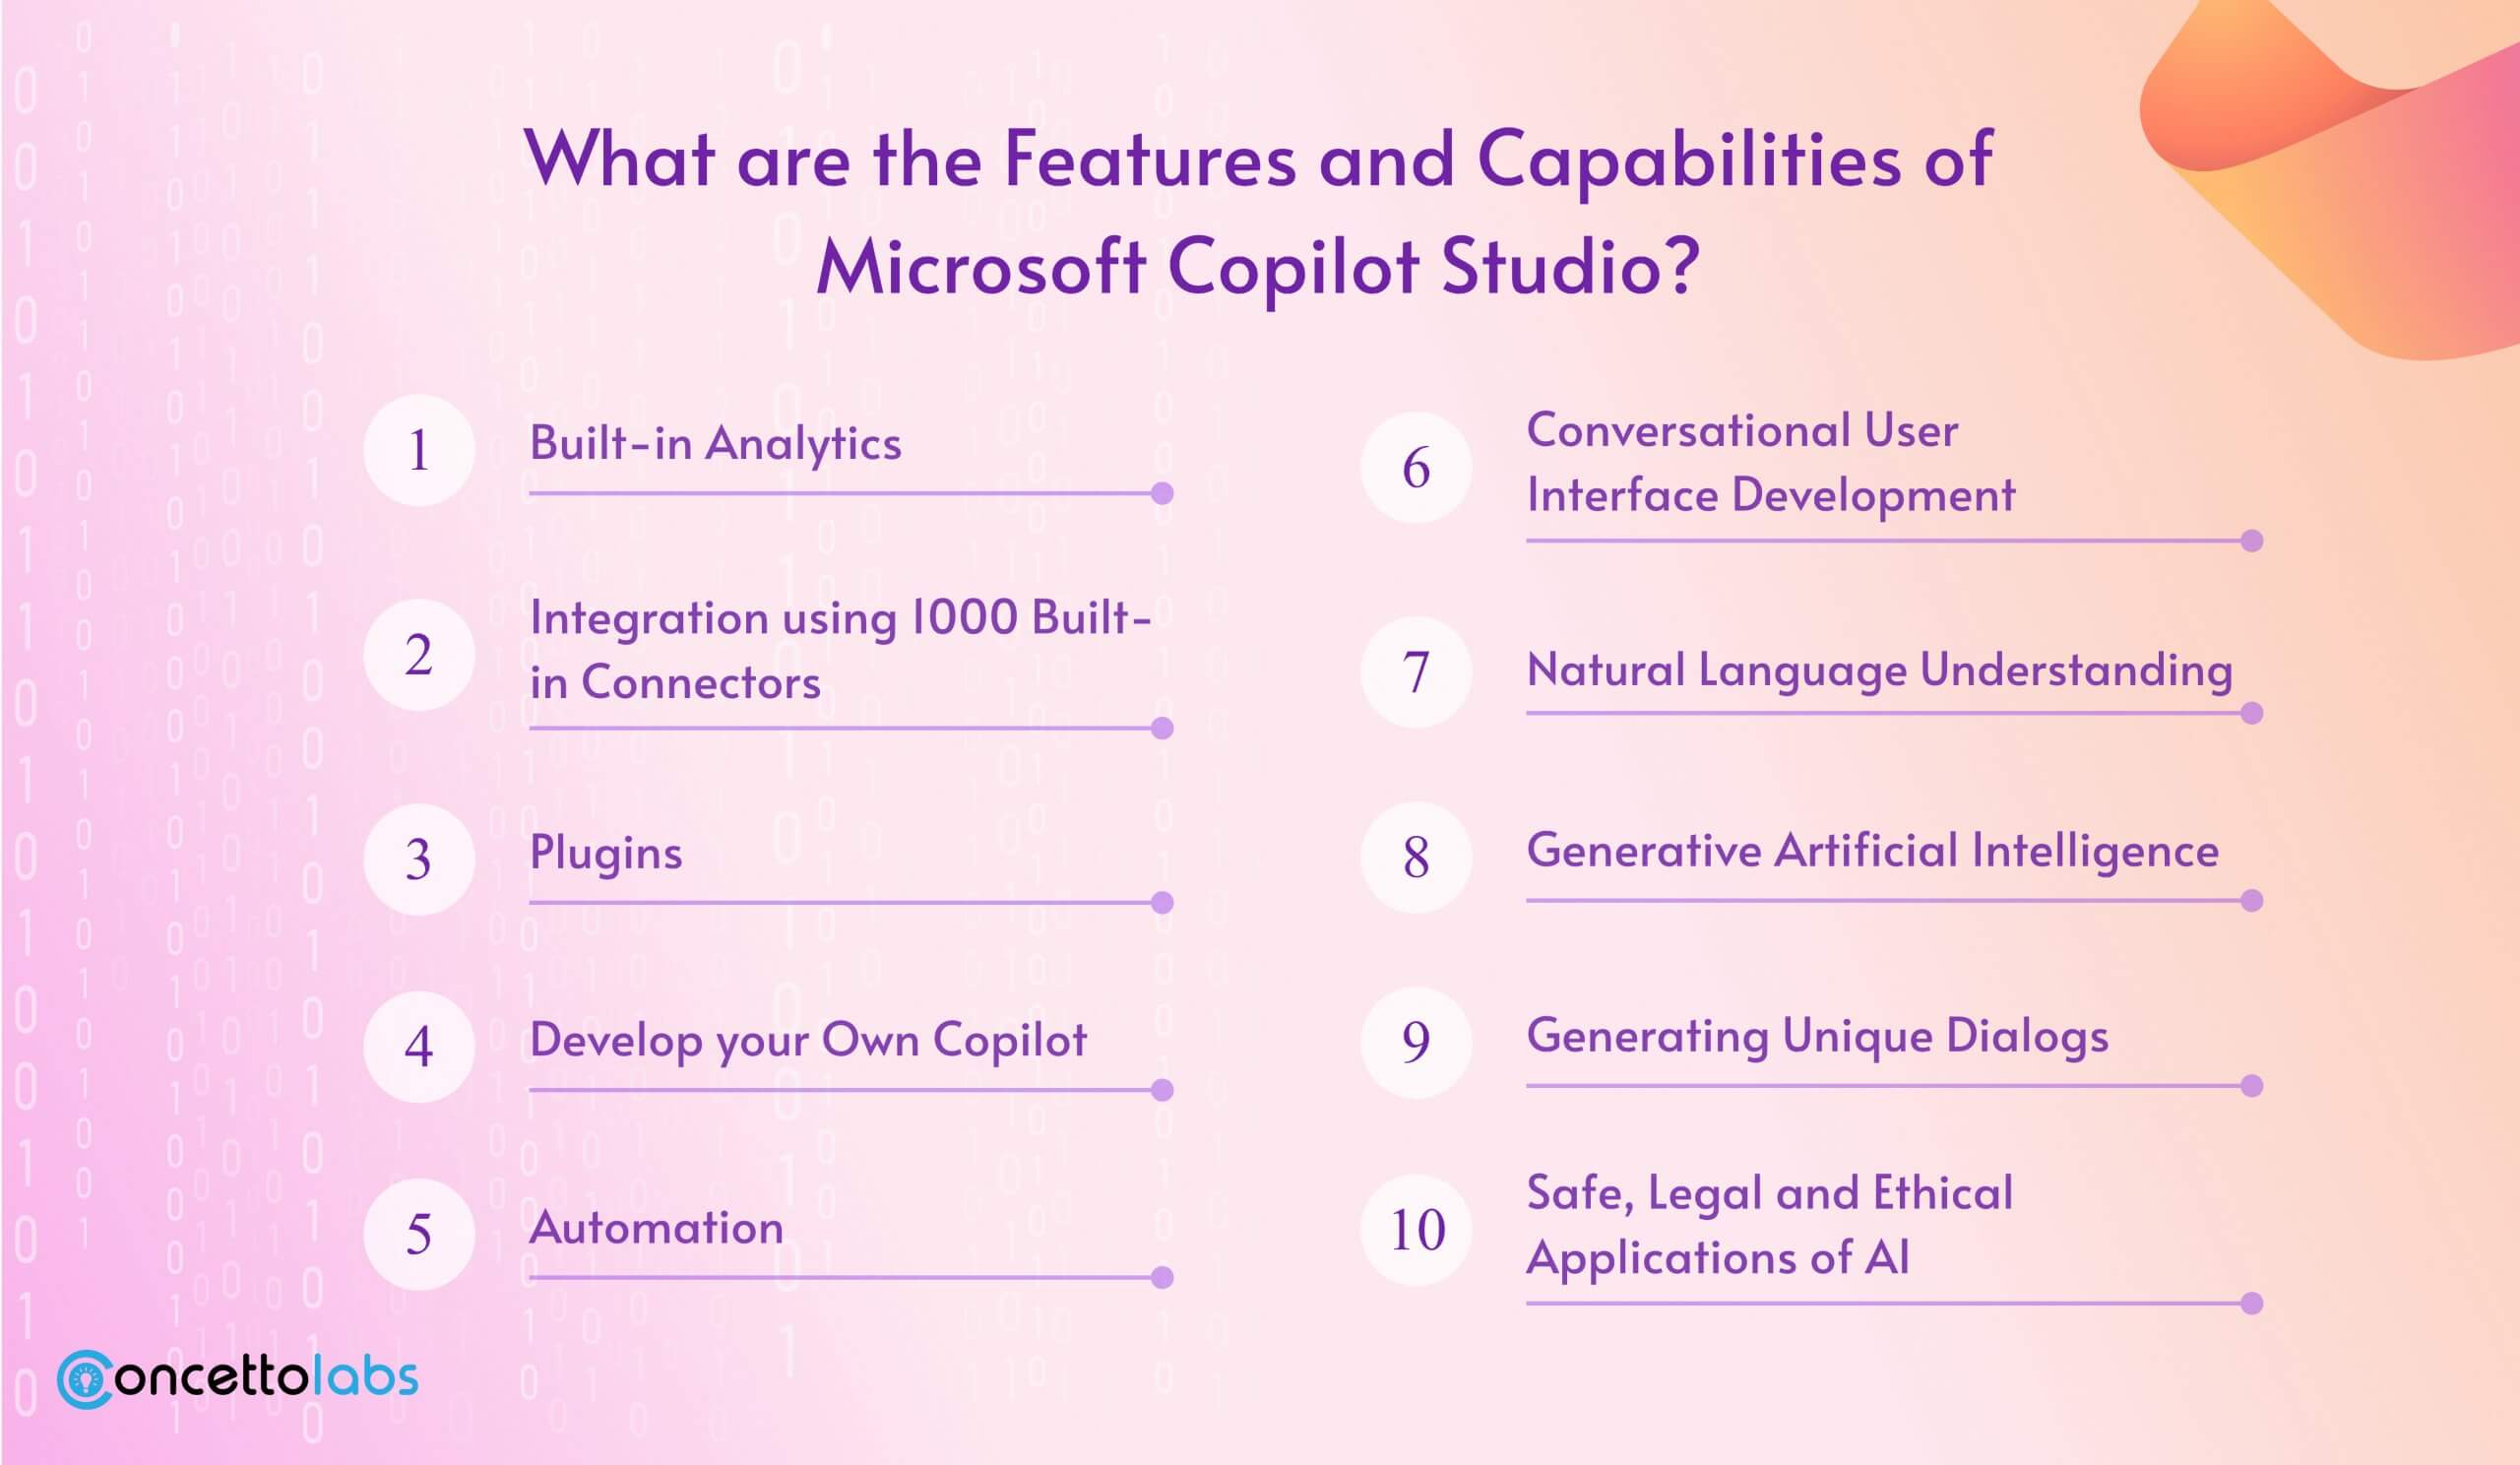 What are the Features and Capabilities of Microsoft Copilot Studio?